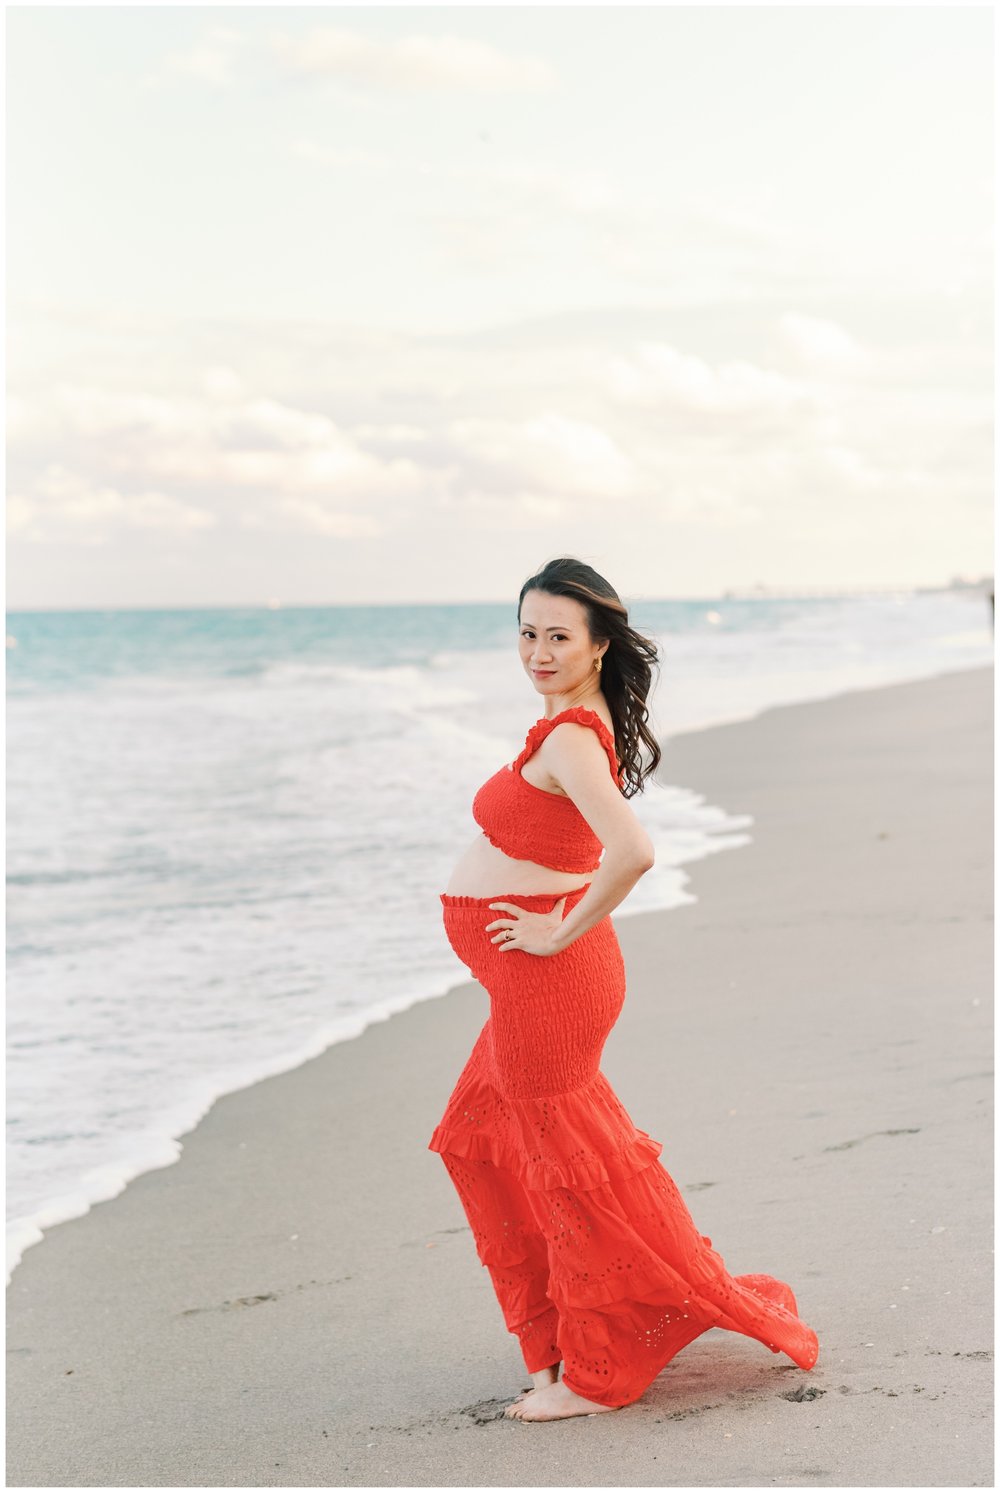 Pregnant woman wearing red two piece top and skirt taking maternity photos on the beach